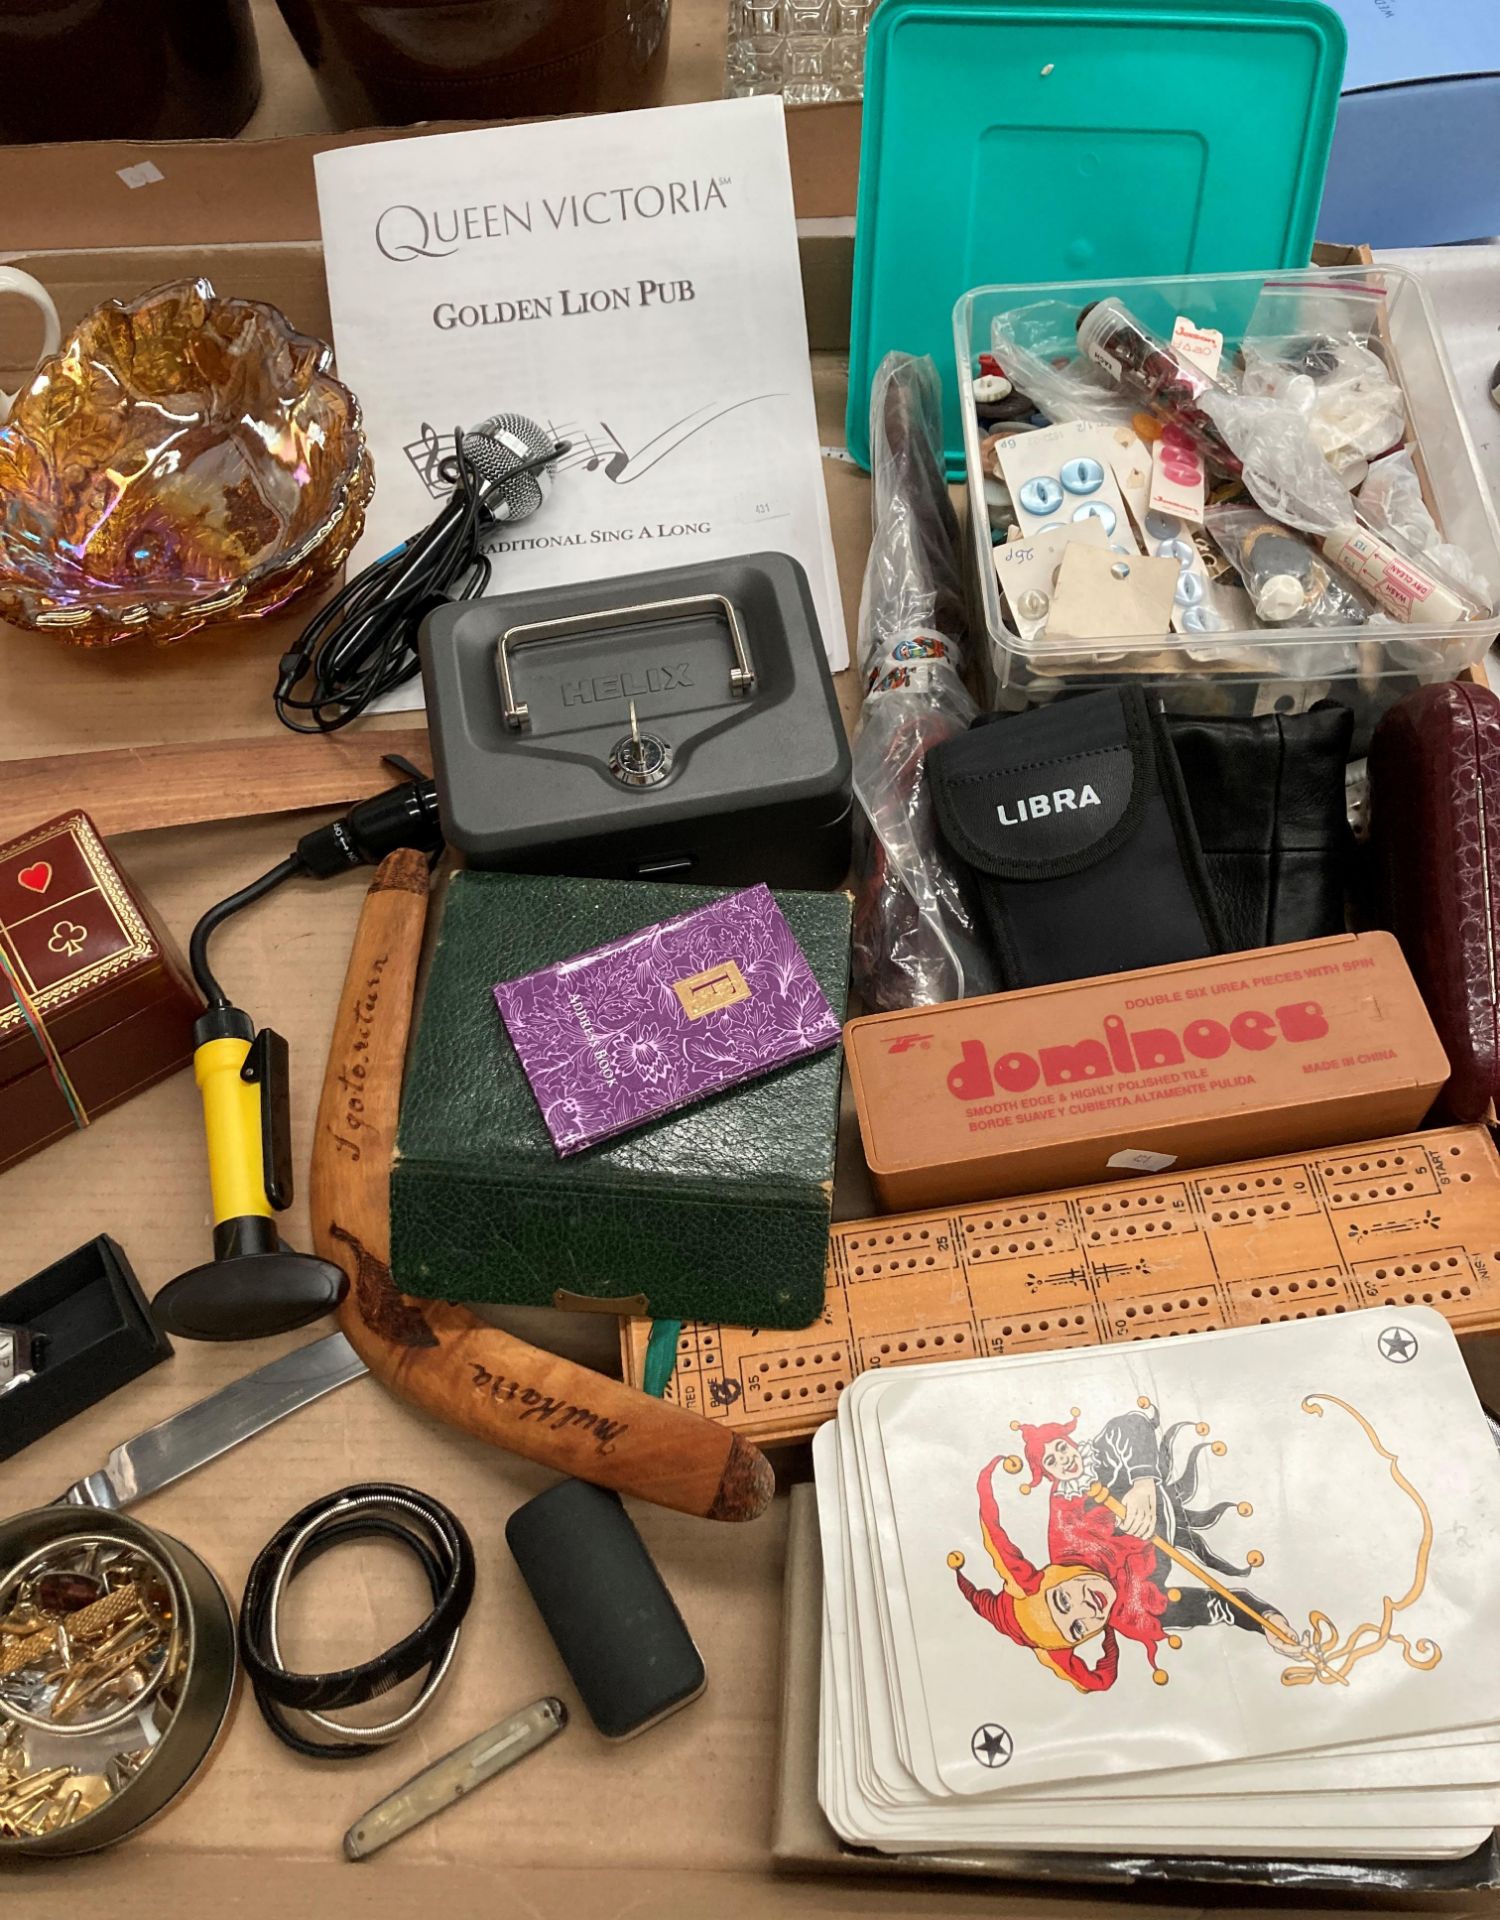 Contents to tray - boomerangs, Helix cash box, sewing accessories, games and cards, - Image 3 of 3